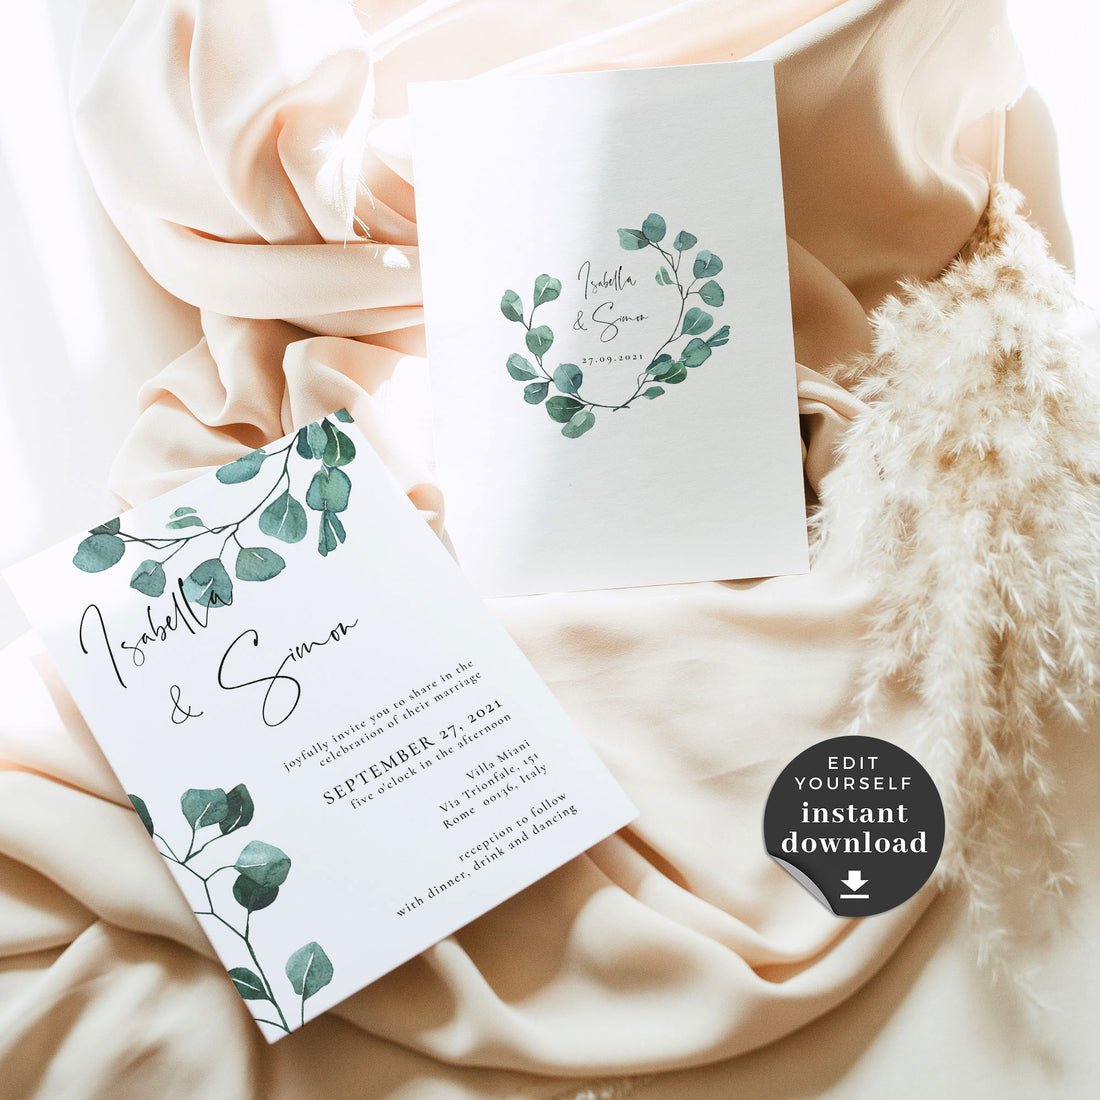 Best Printer for Cardstock Invitations - A Touch of LA